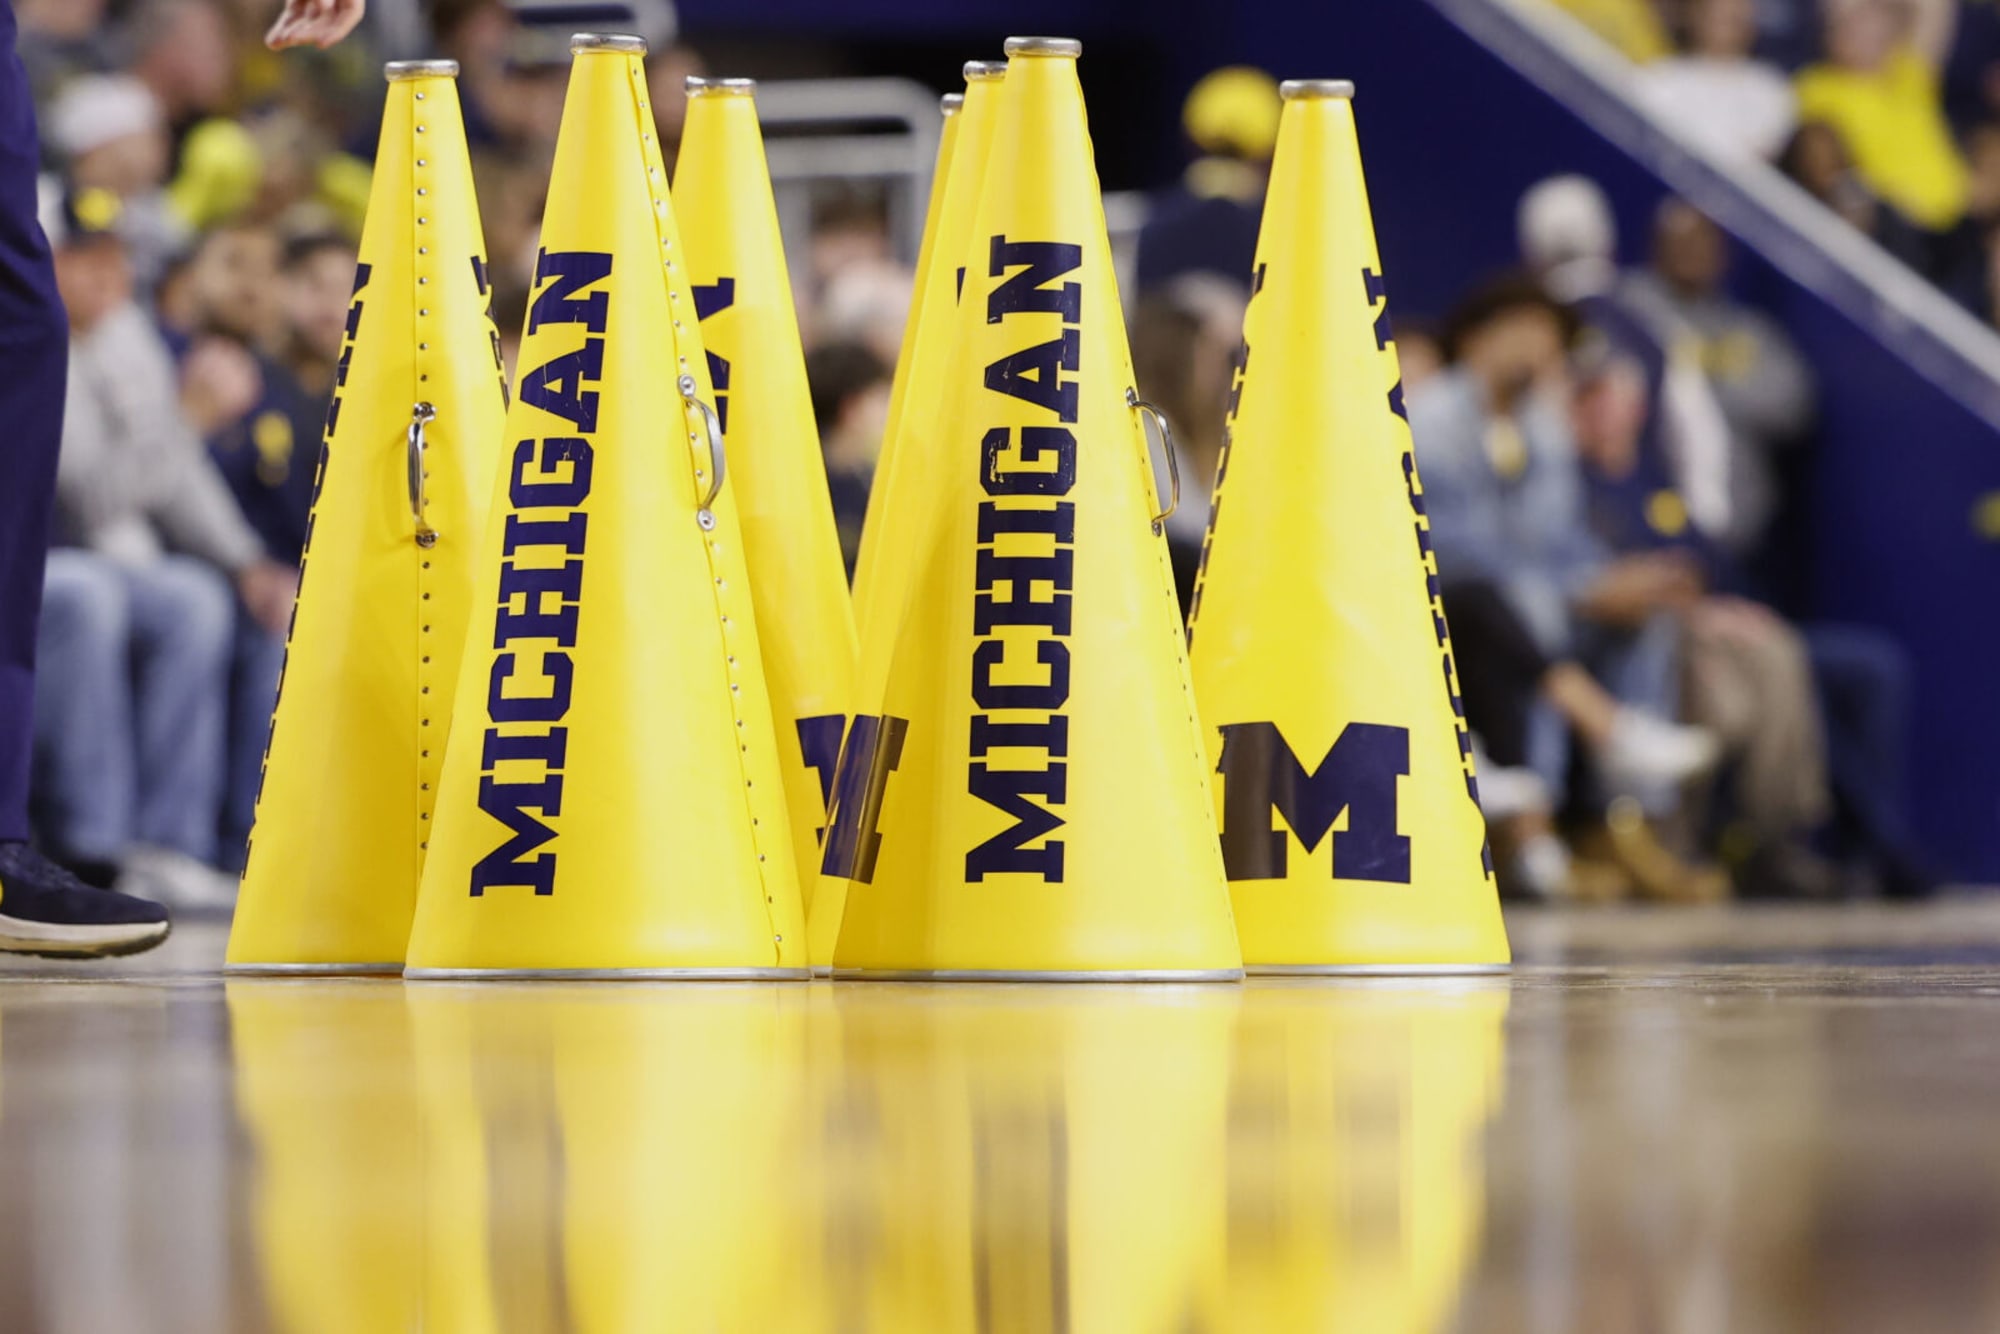 Michigan basketball appears twice in most surprising transfer